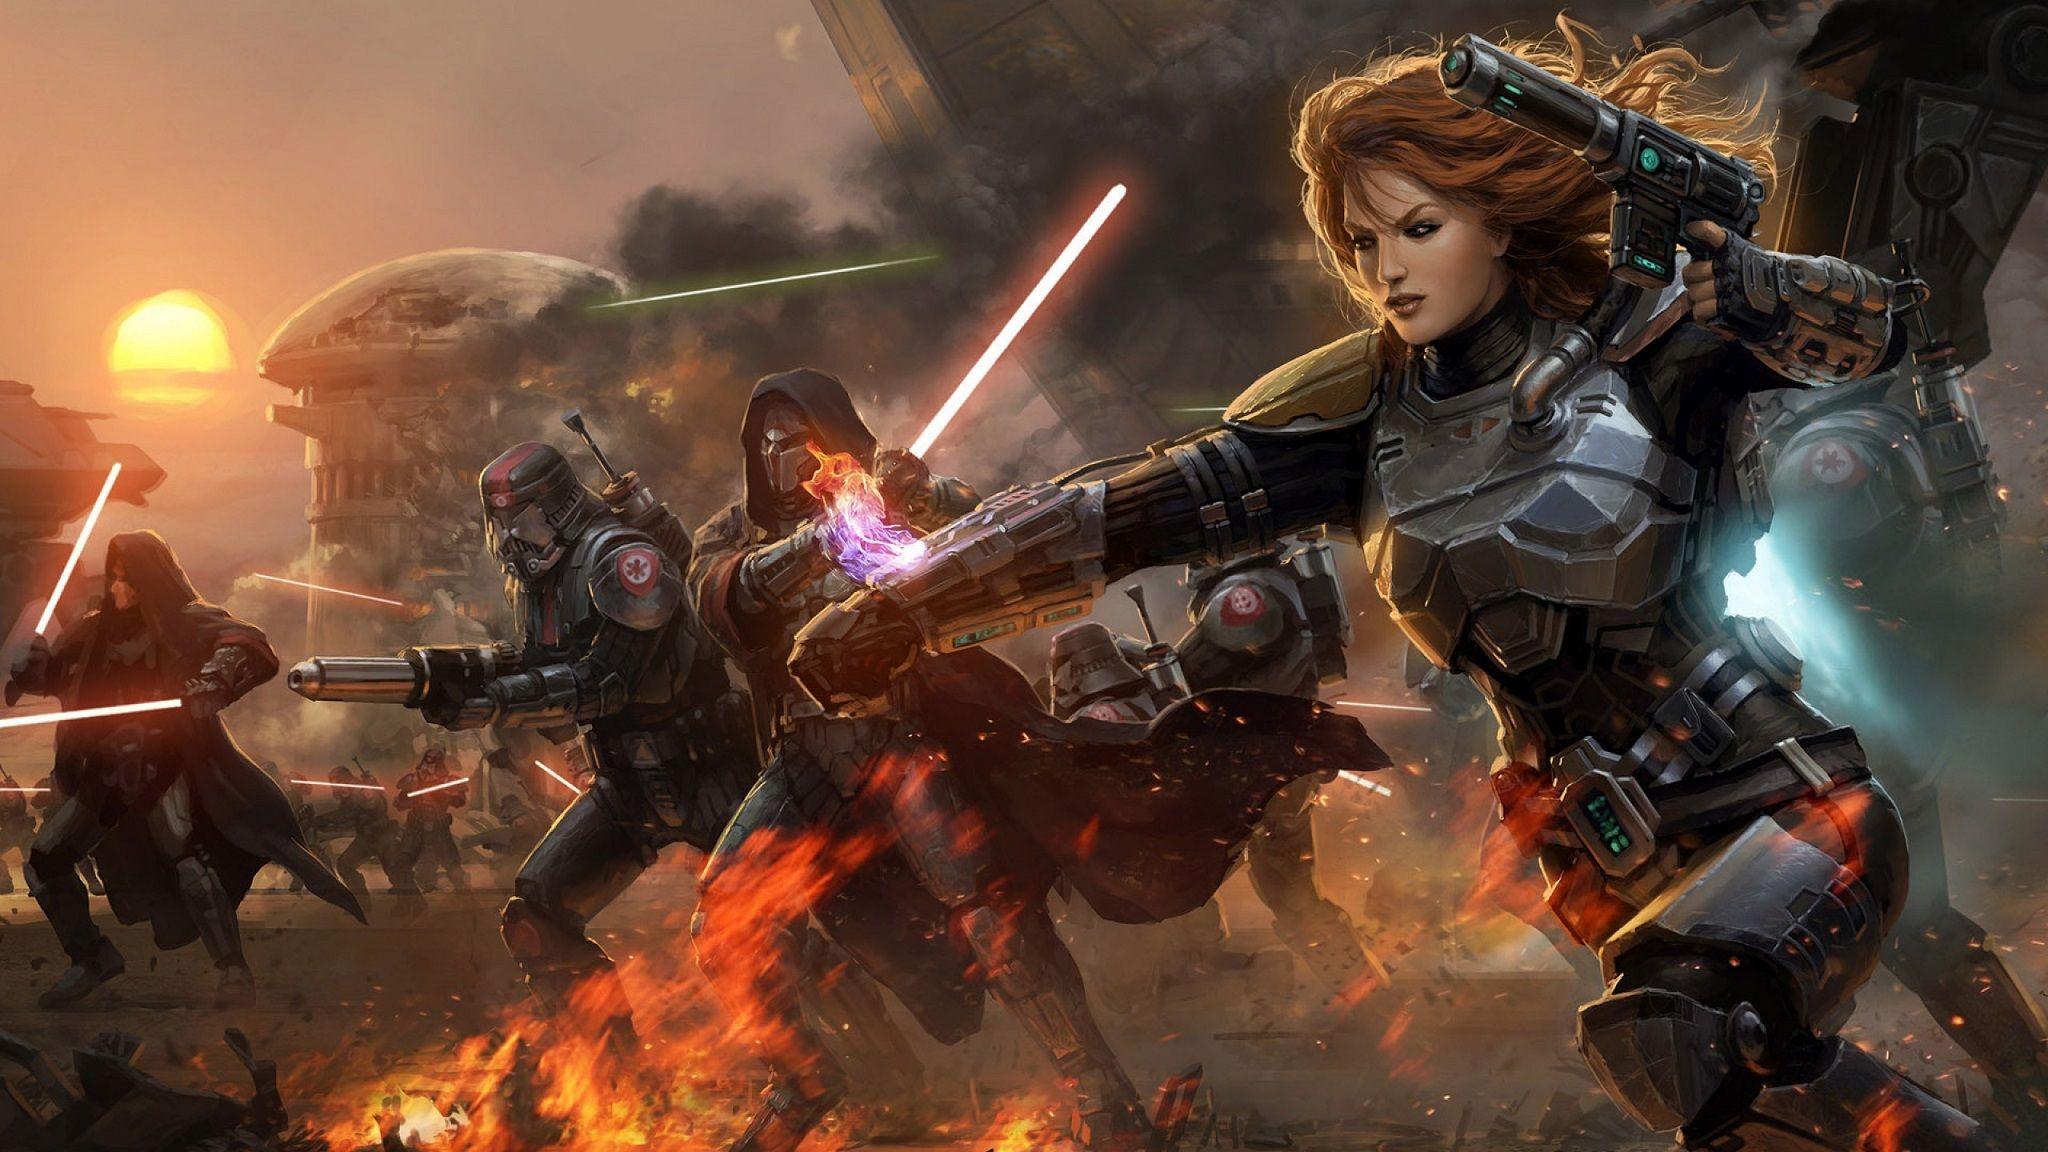 Star Wars The Old Republic: Swtor Full HD Wallpaper And Background